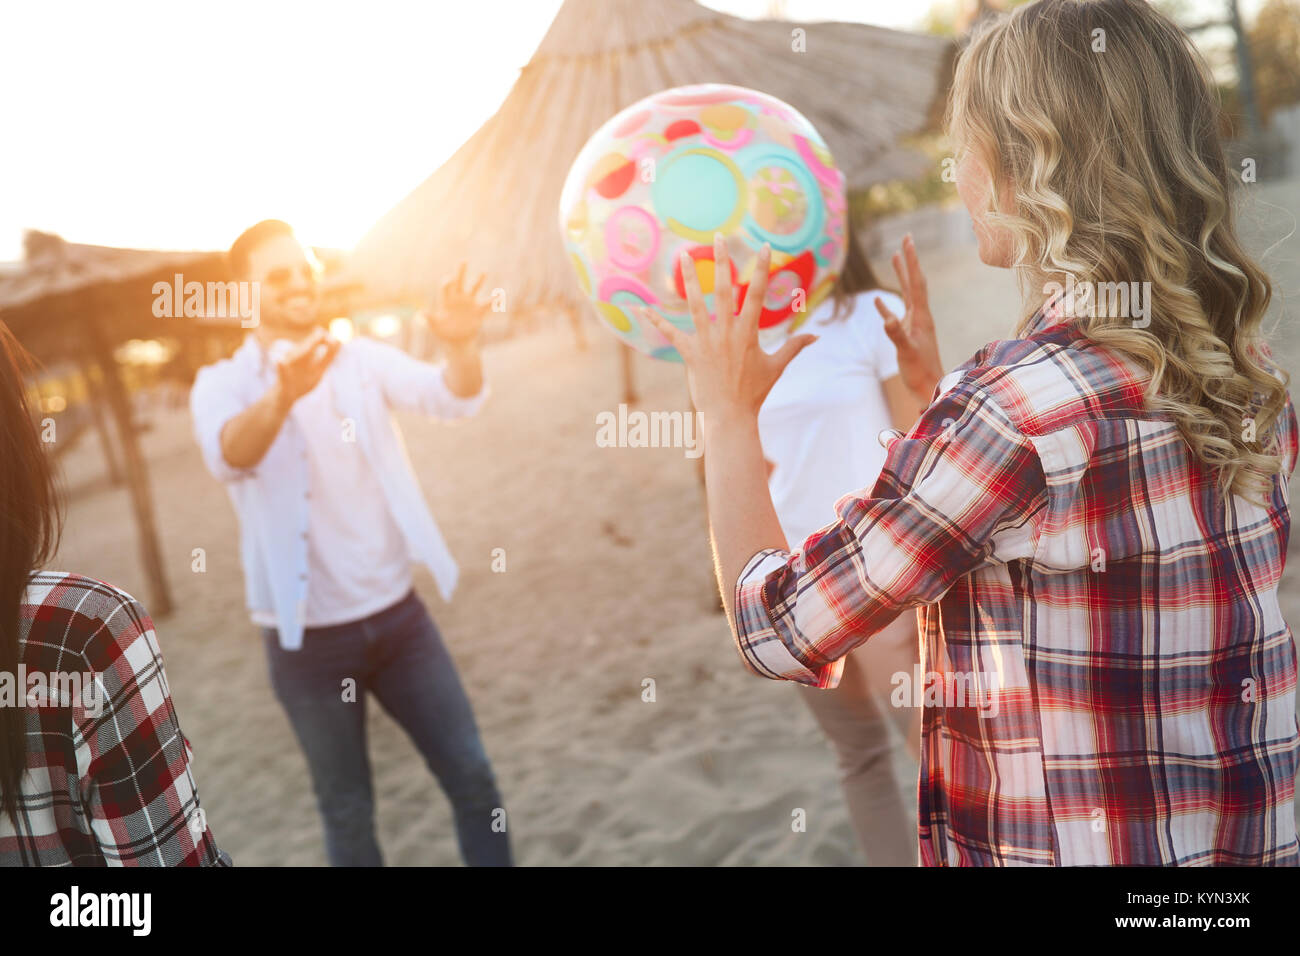 Group of young cheerful friends playing with ball Stock Photo